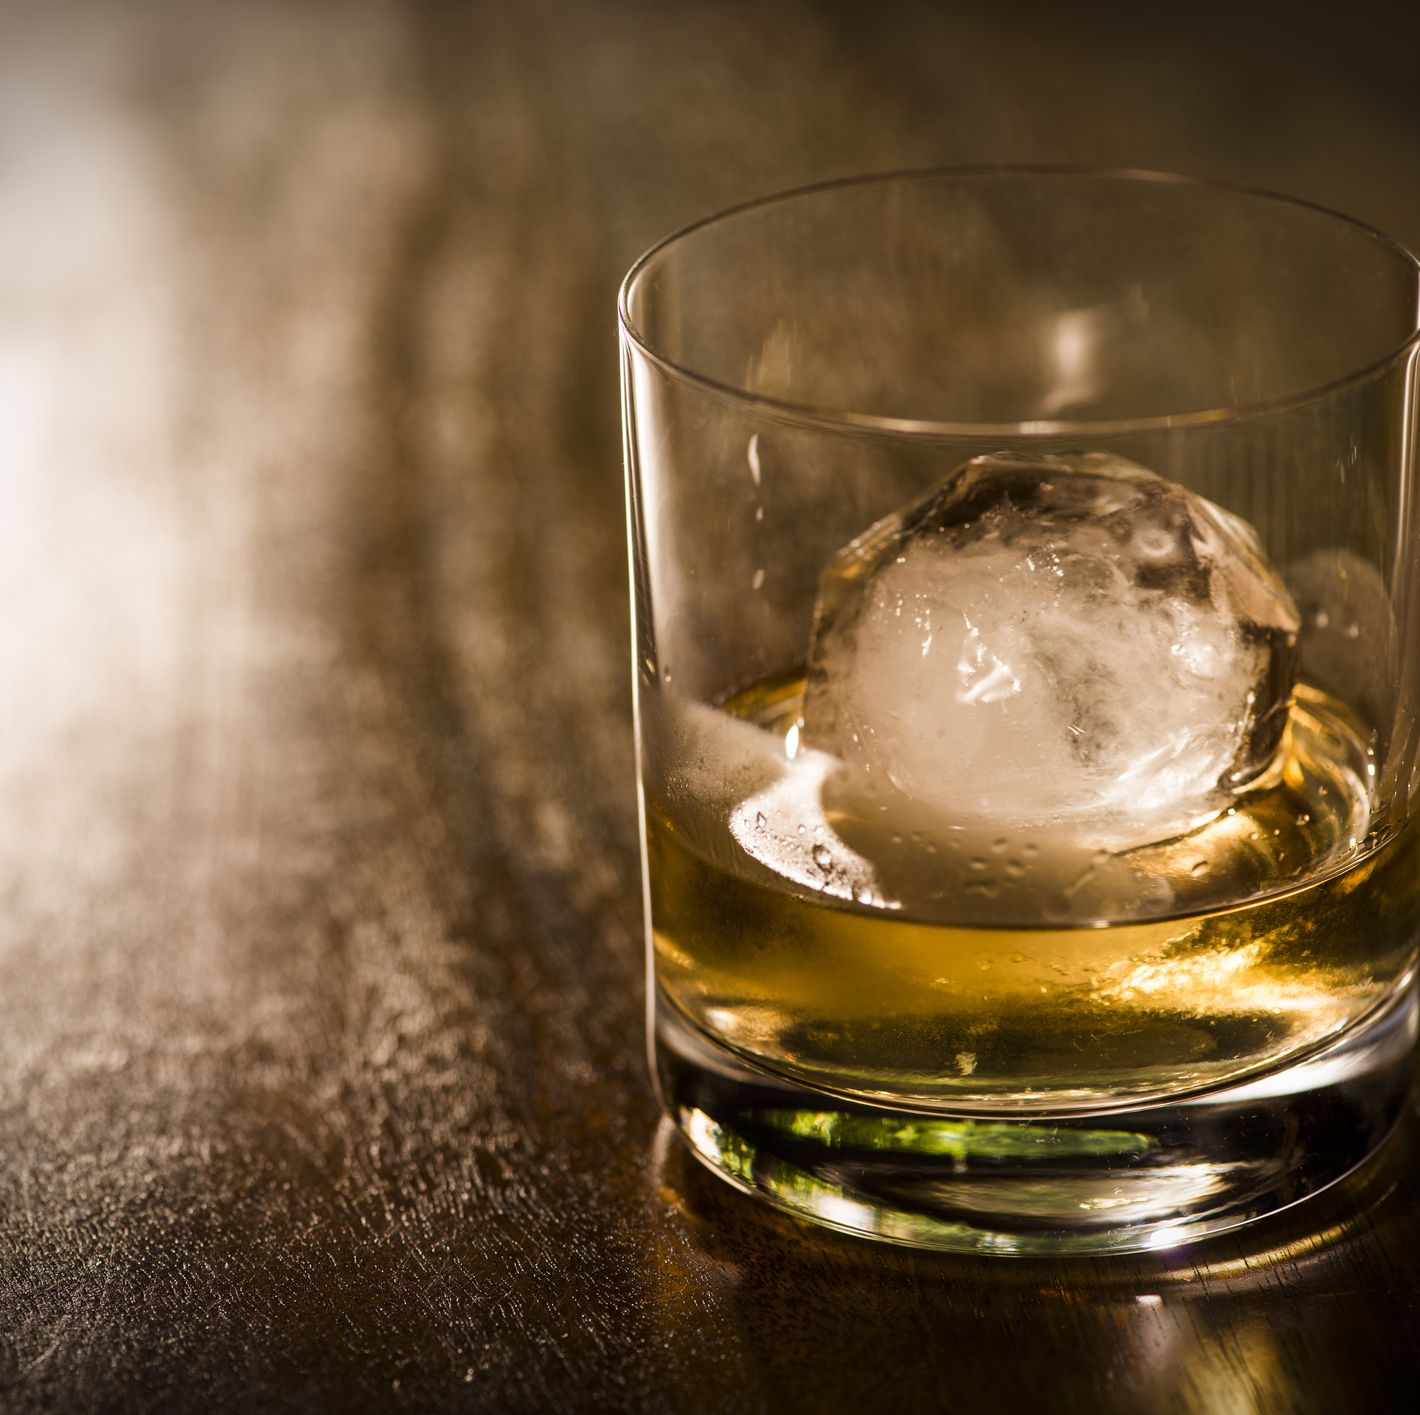 Scientists Say Water Can Change Whiskey Flavor For the Better, But Don't Dilute It Past This Point